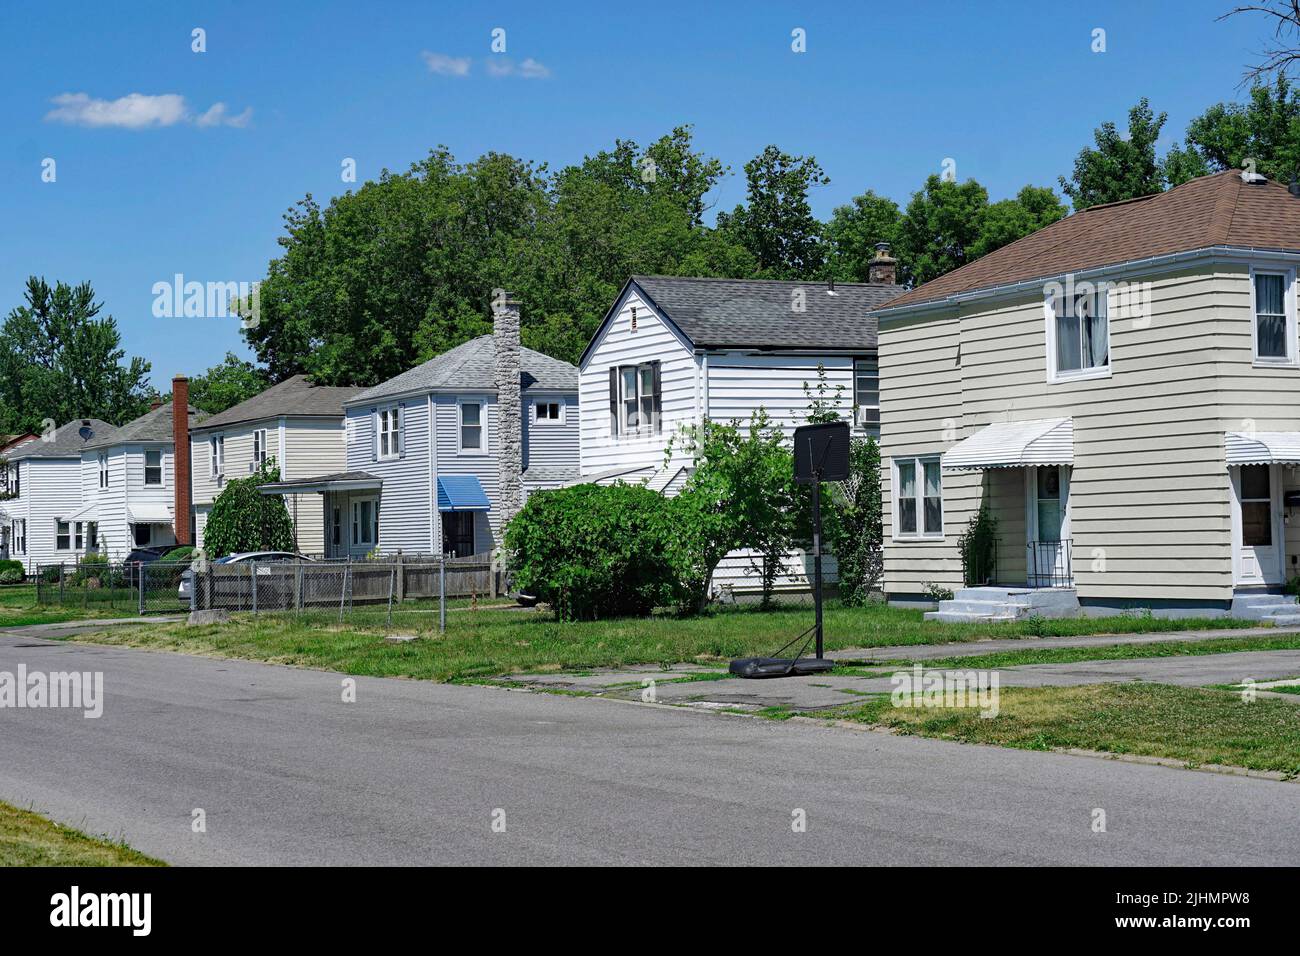 American suburban residential street with two story clapboard houses Stock Photo